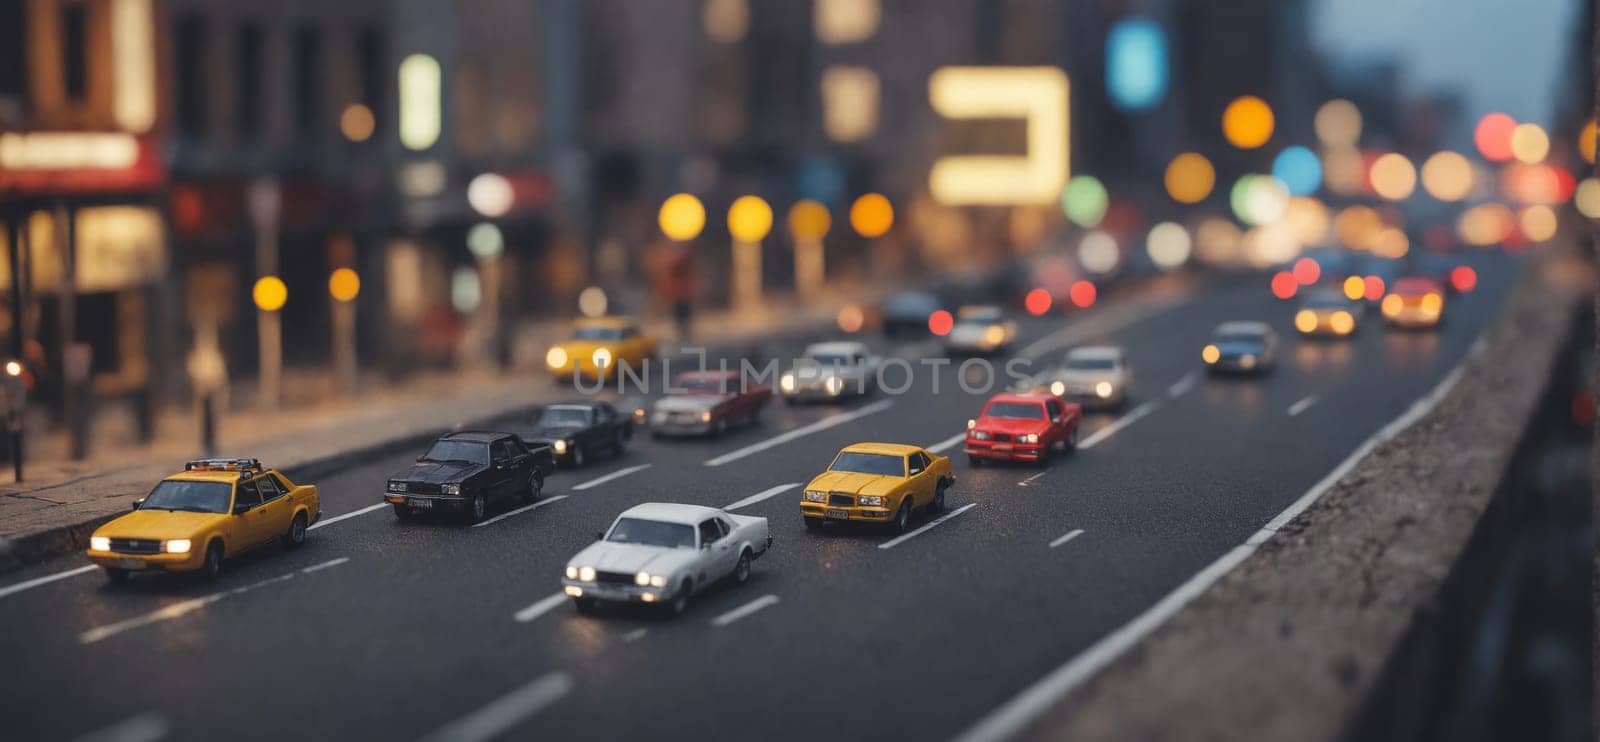 Miniature Metropolis: Tilt-Shift Illusion of City Traffic by Andre1ns